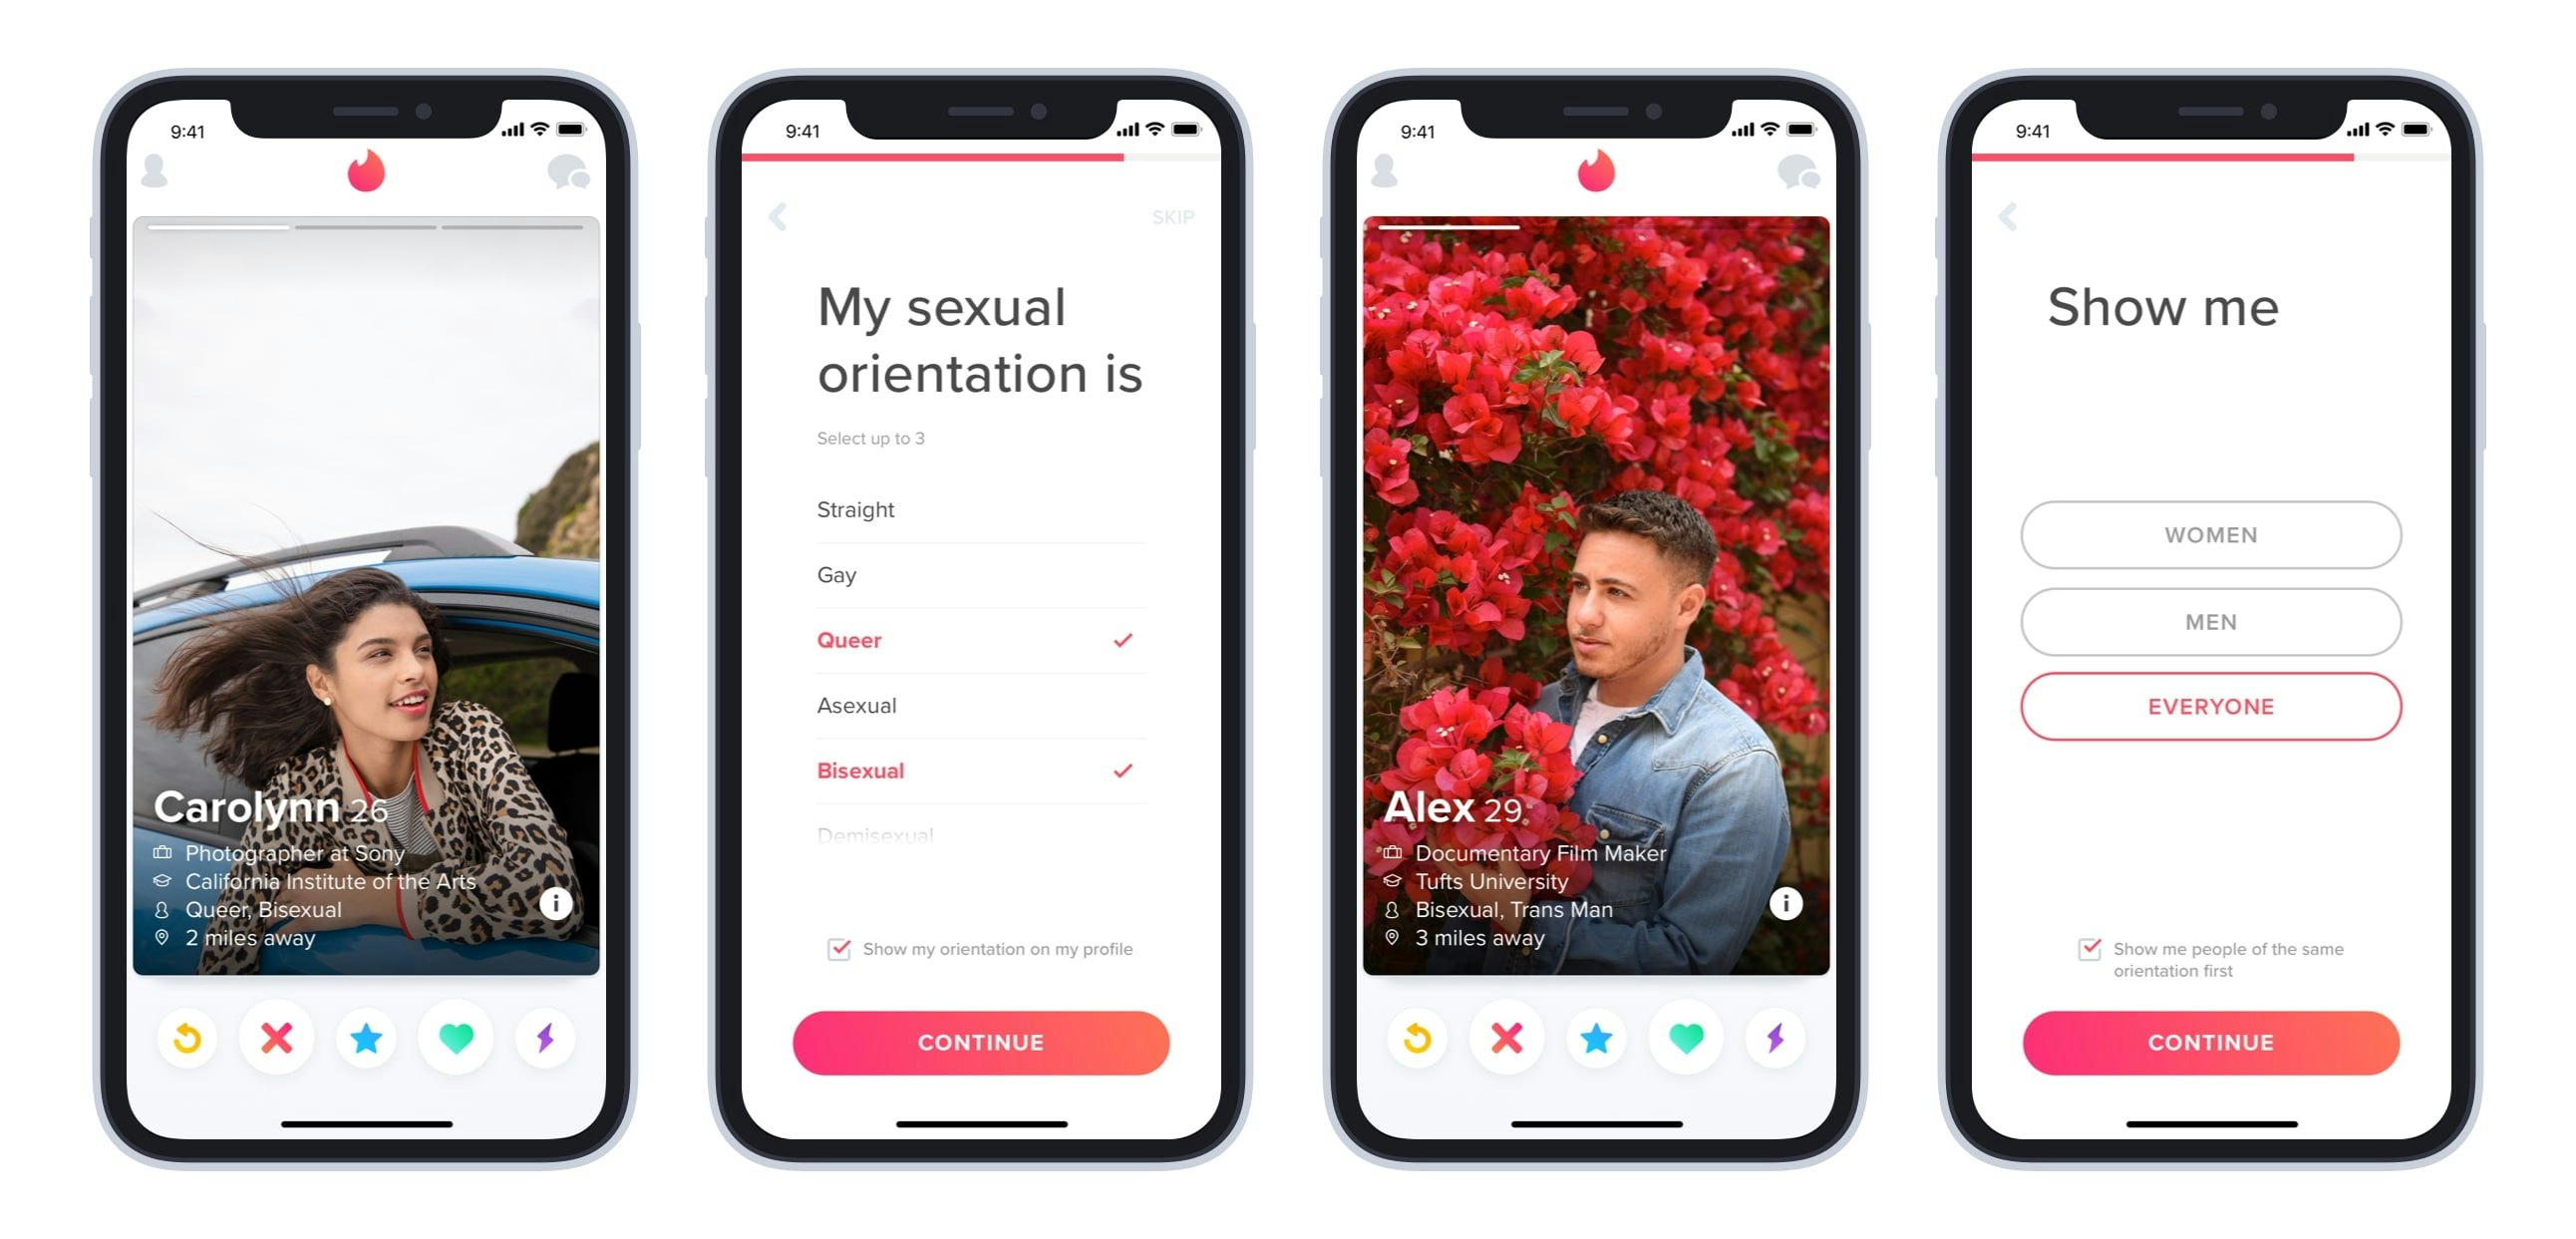 Online dating isn’t easy — especially when you’re asexual